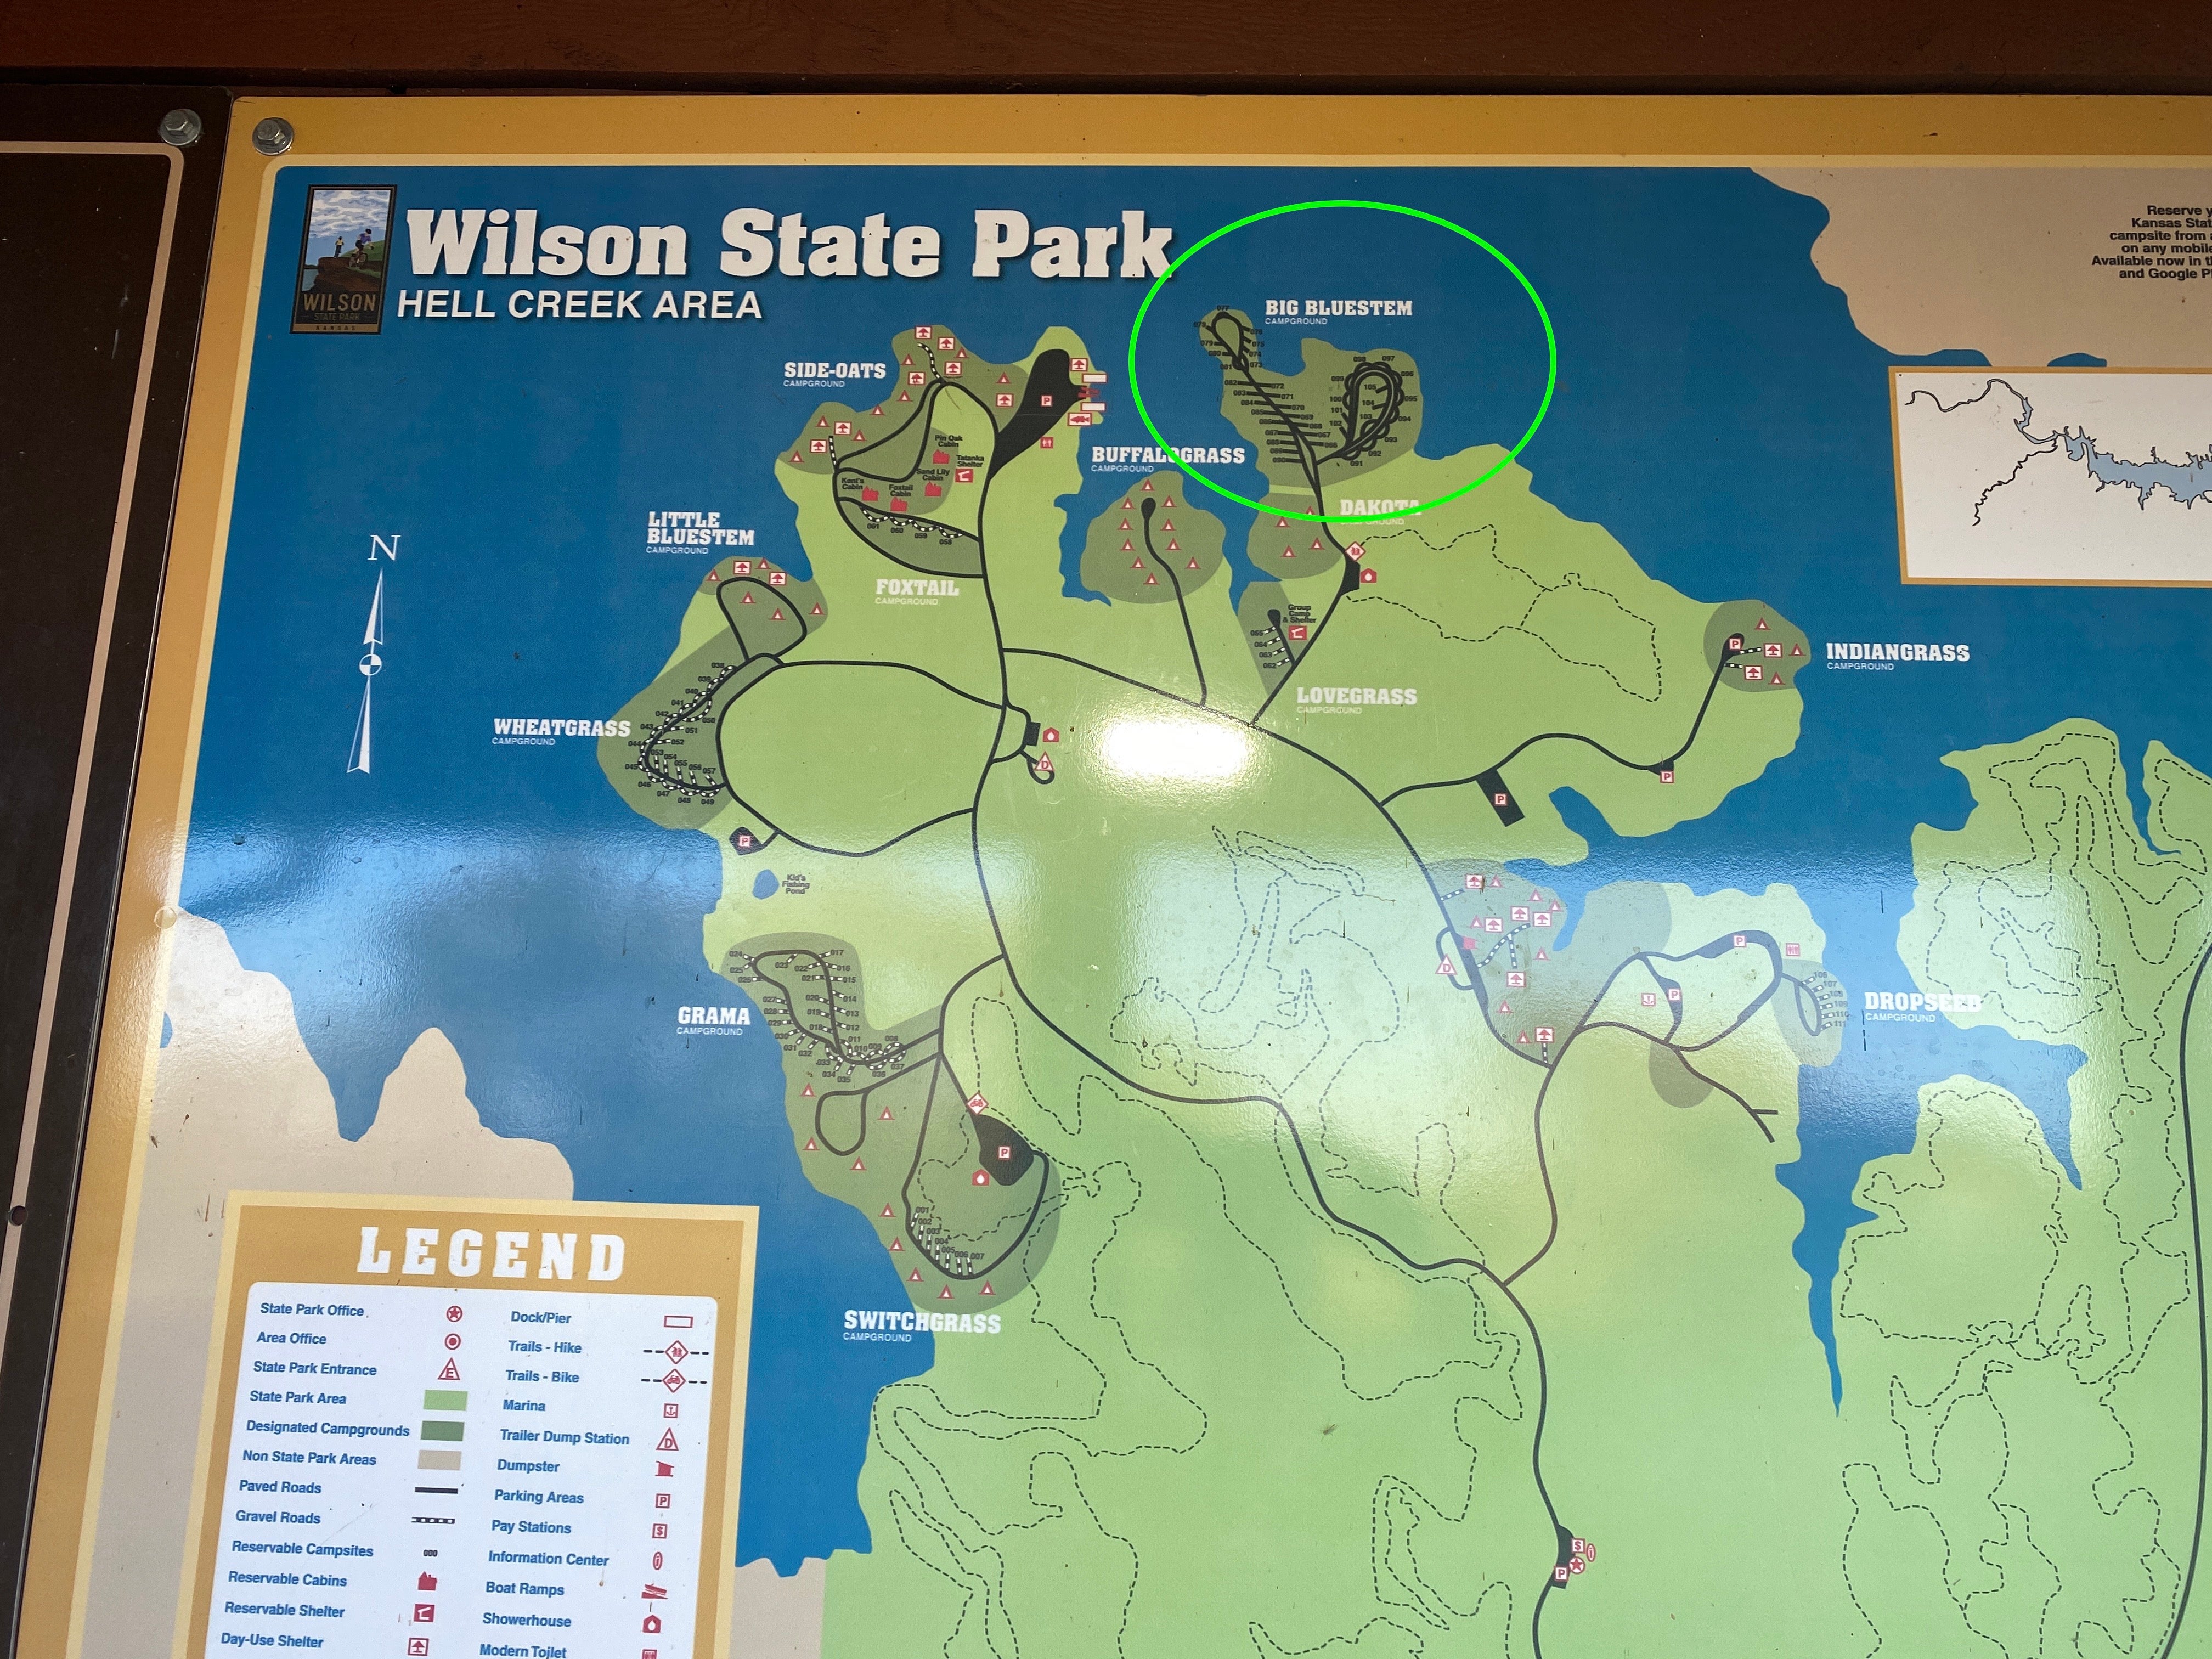 Camper submitted image from Big Bluestem — Wilson State Park - 1